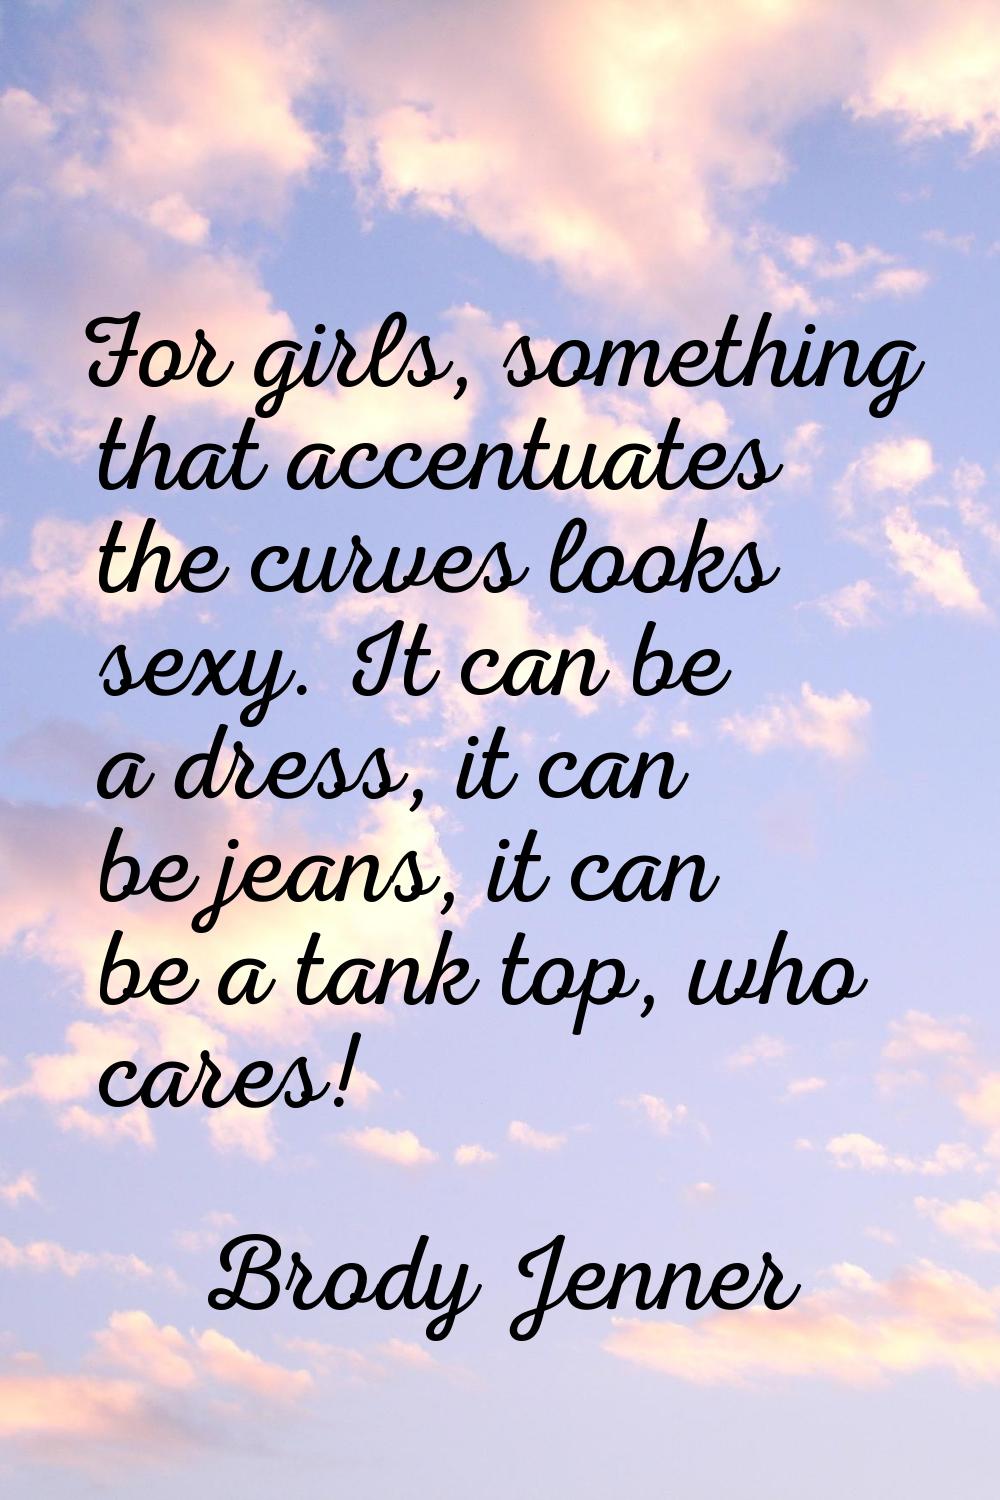 For girls, something that accentuates the curves looks sexy. It can be a dress, it can be jeans, it